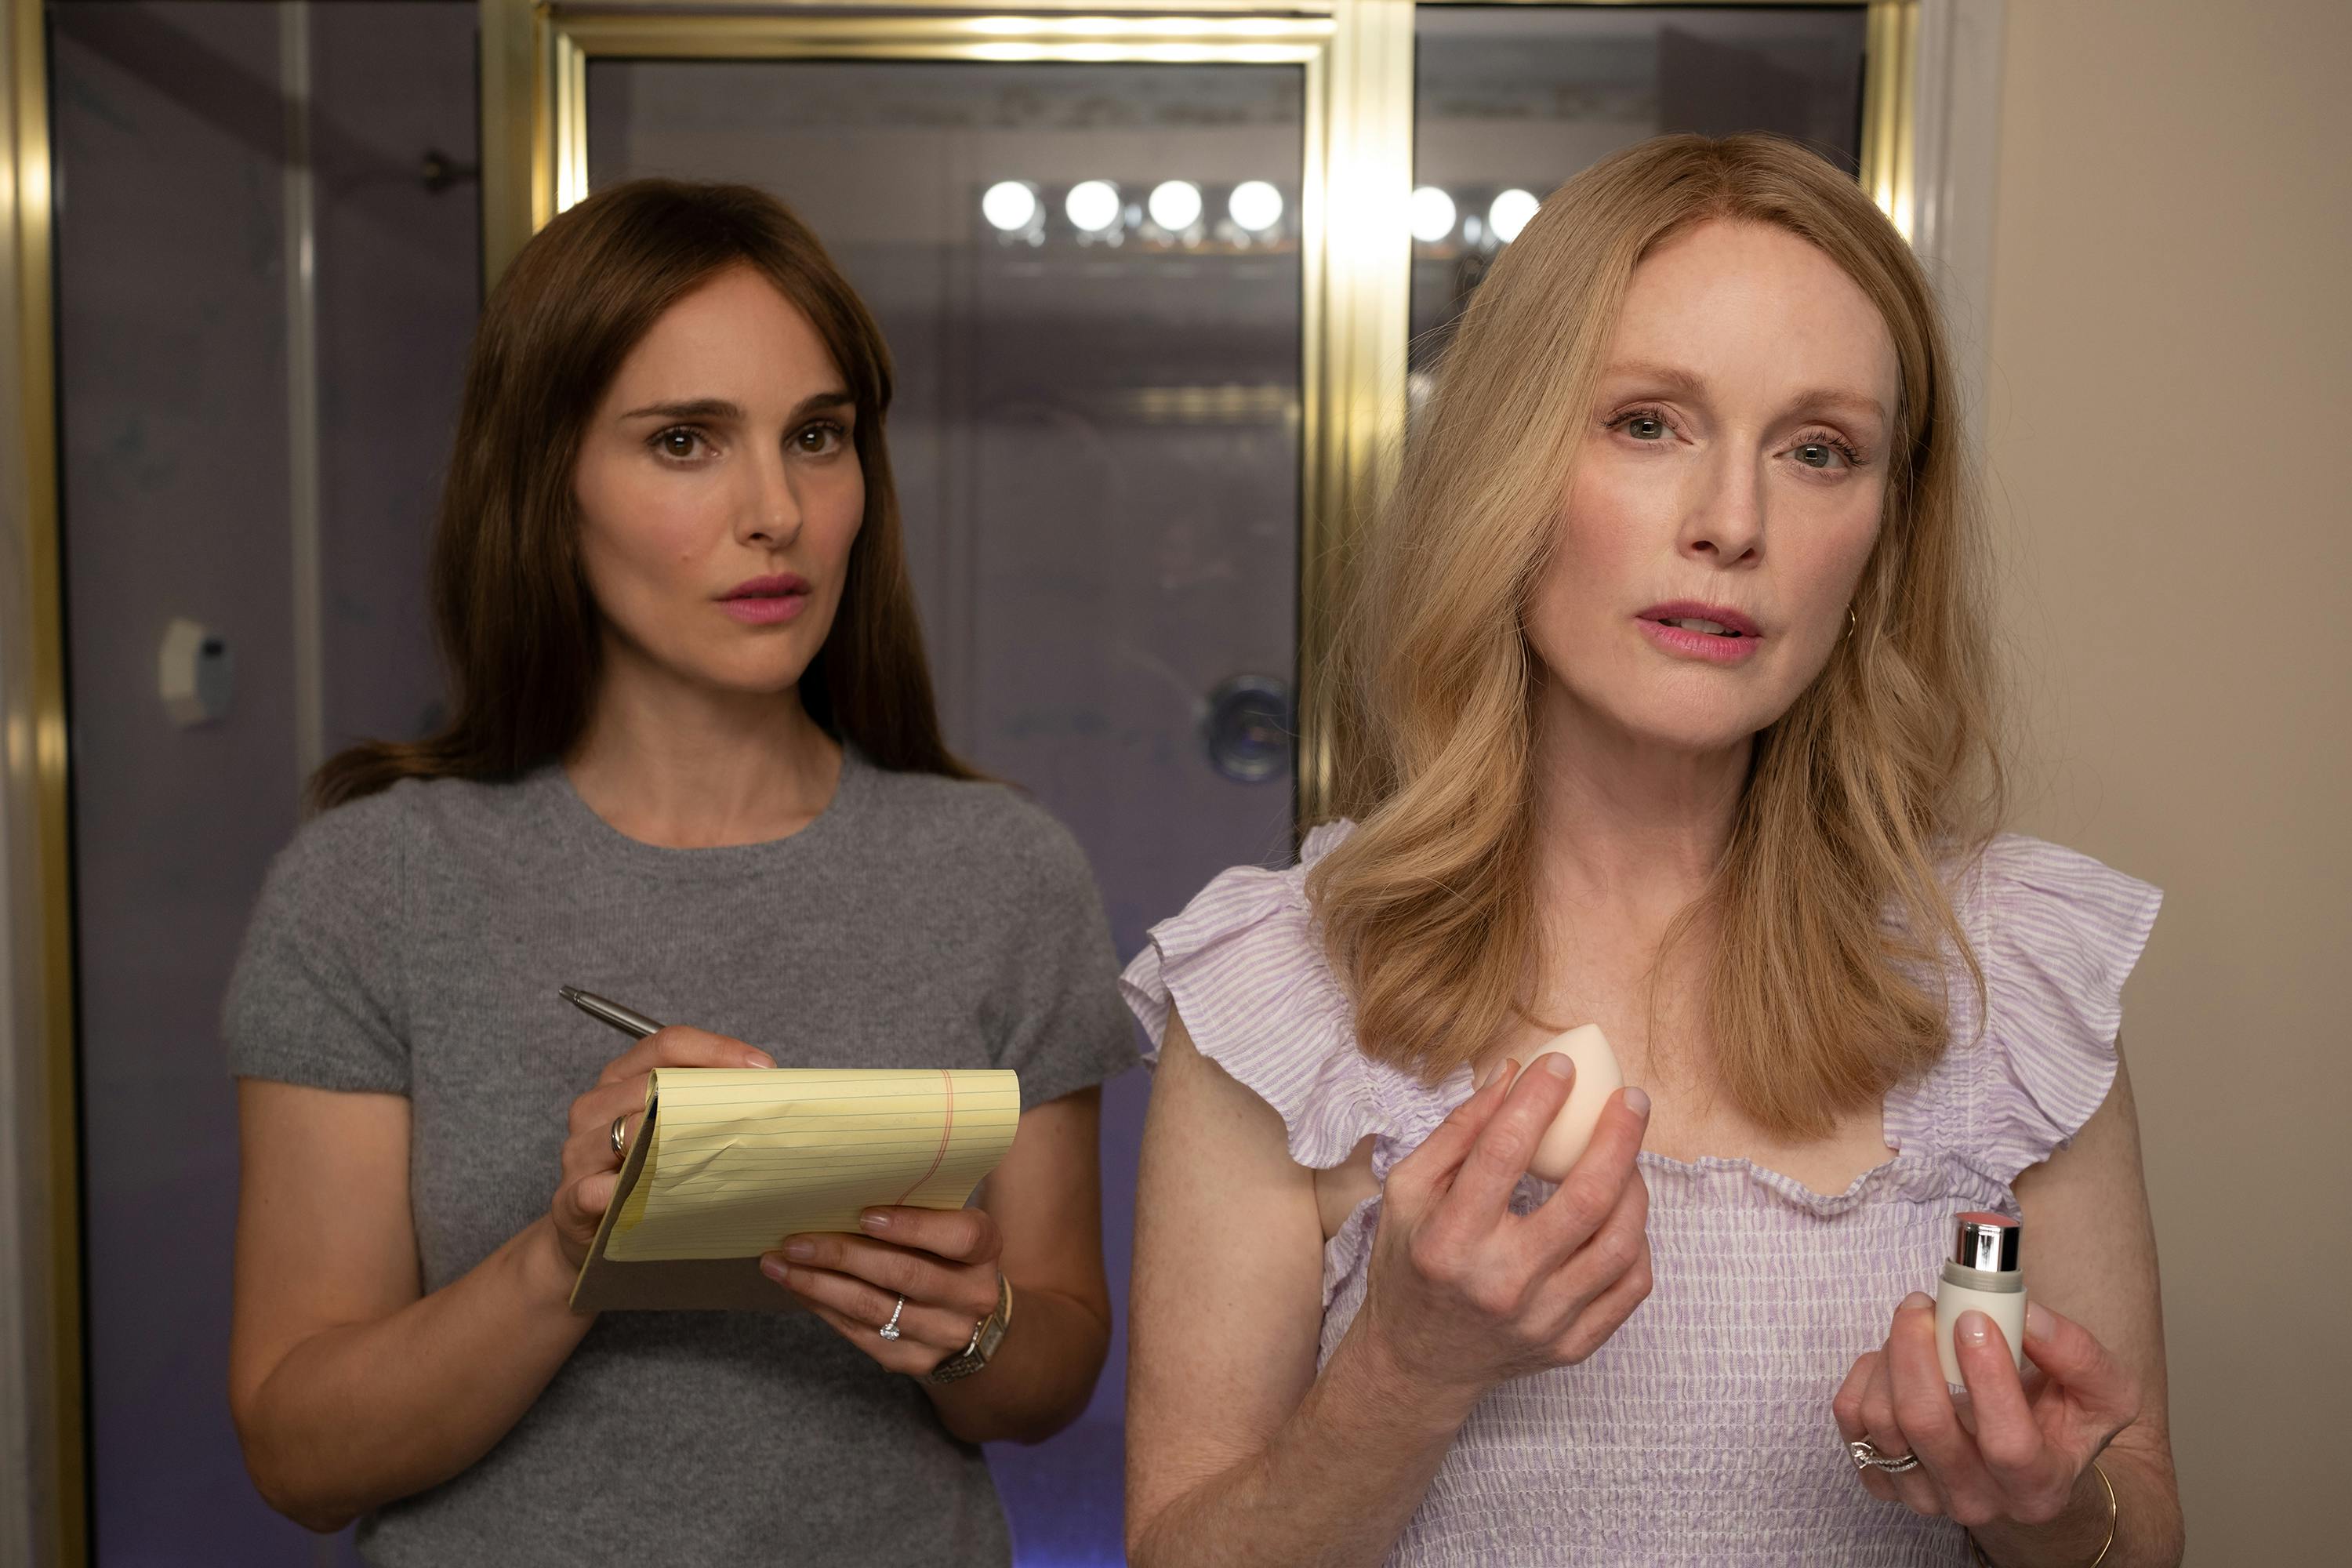 Elizabeth (Natalie Portman) and Gracie (Julianne Moore) stand in front of a lit mirror. Portman wears a grey T-shirt and writes on a small yellow legal pad. Gracie holds a beauty blender and a stick of blush and wears a frilly purple dress.